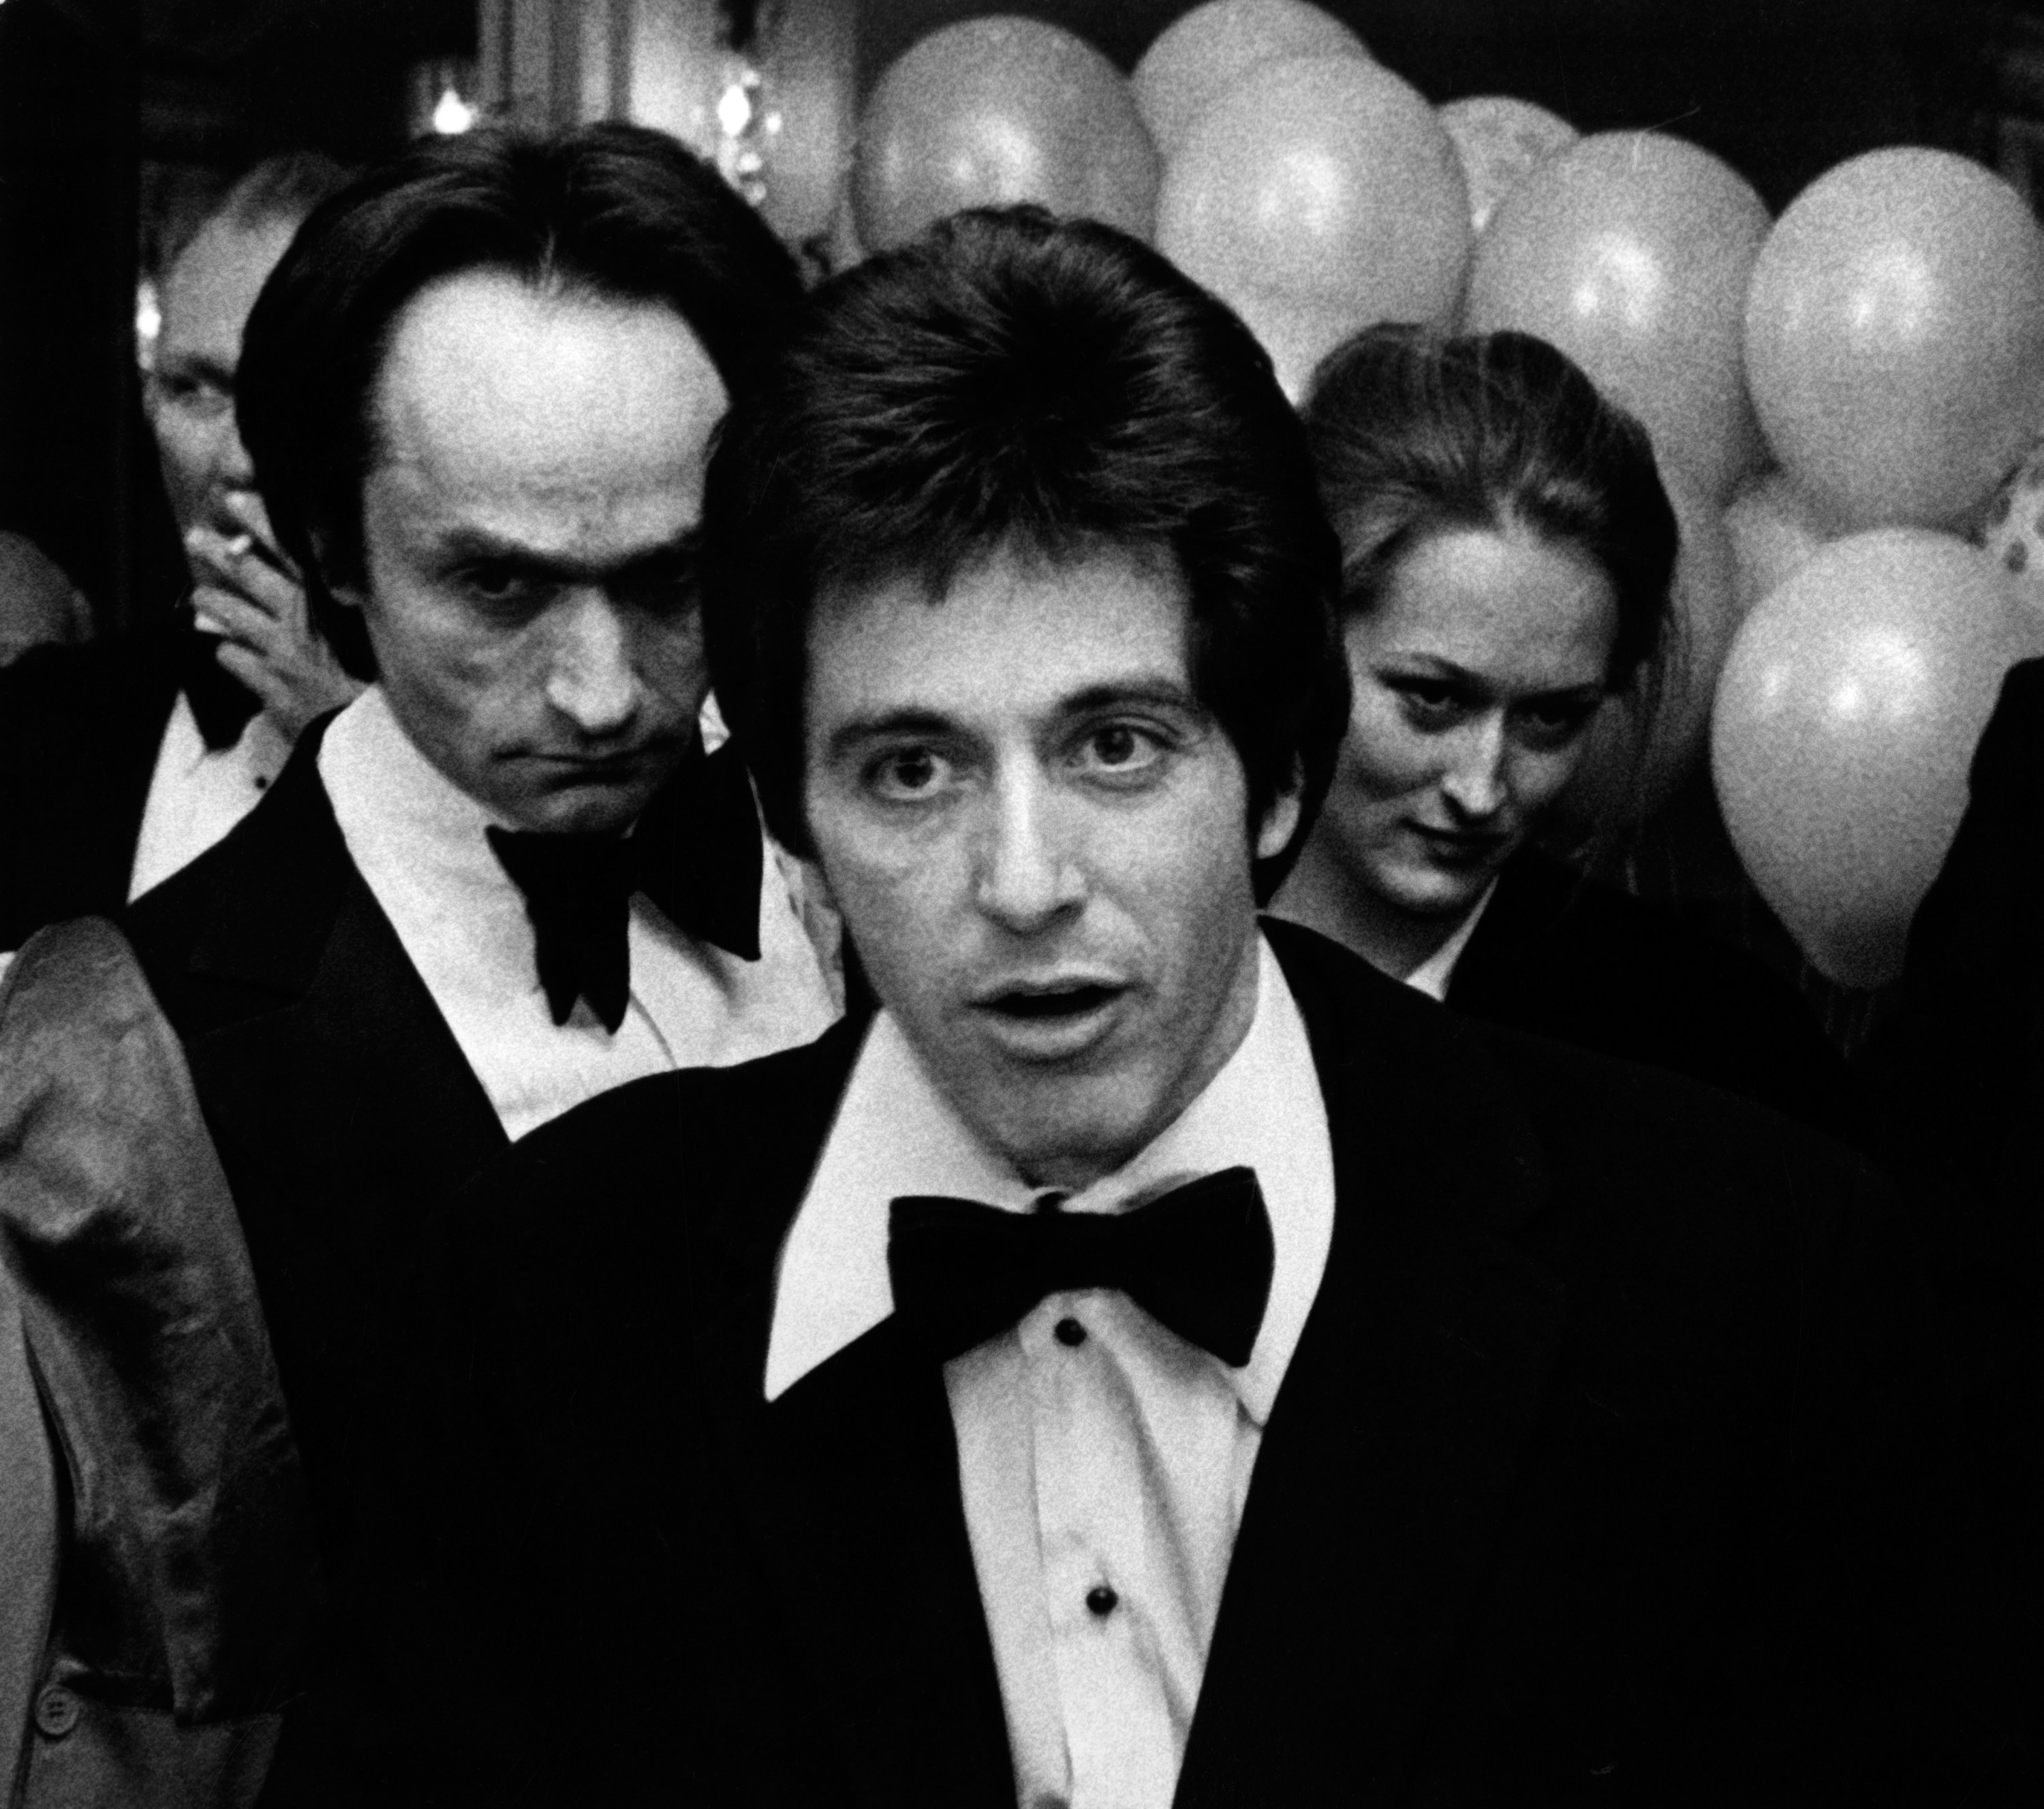 John Cazale and Meryl Streep behind Al Pacino at the 75th Birthday Party for Lee Strasberg on November 29, 1976 | Source: Getty Images